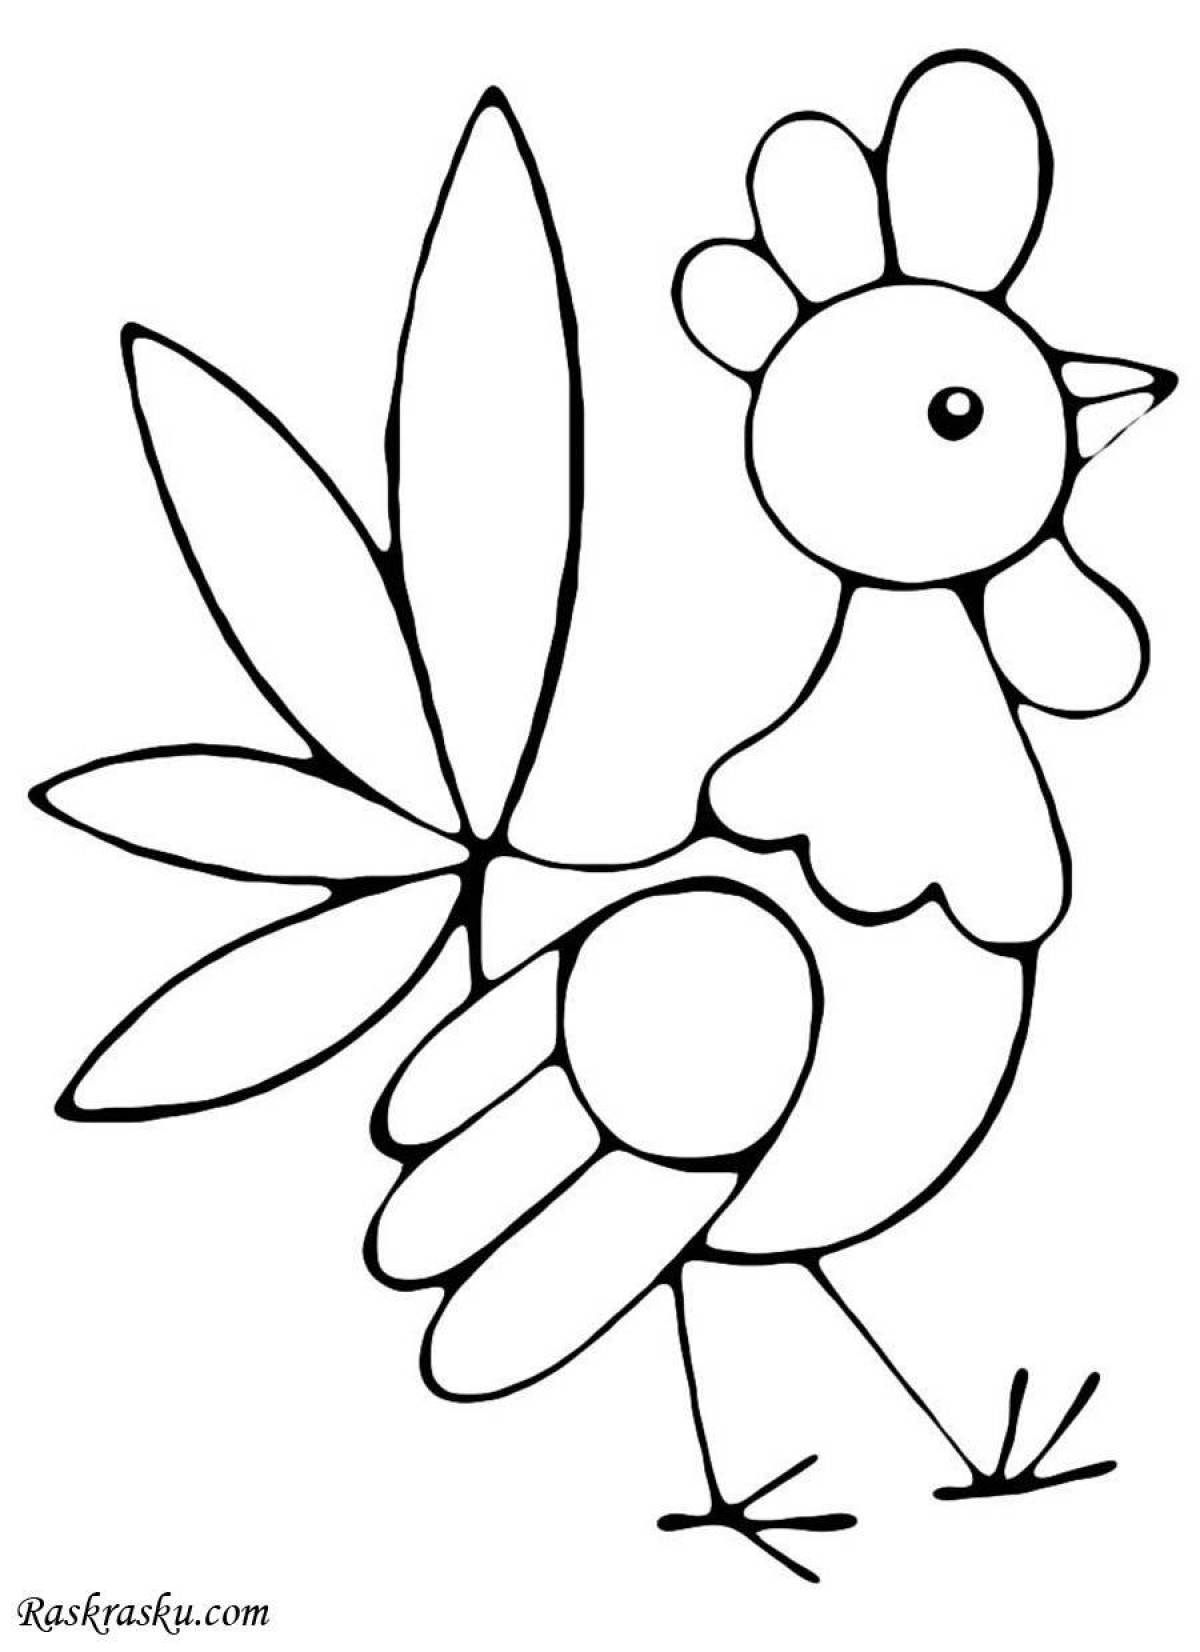 Color-frenzy coloring page for toddlers 1 2 years old